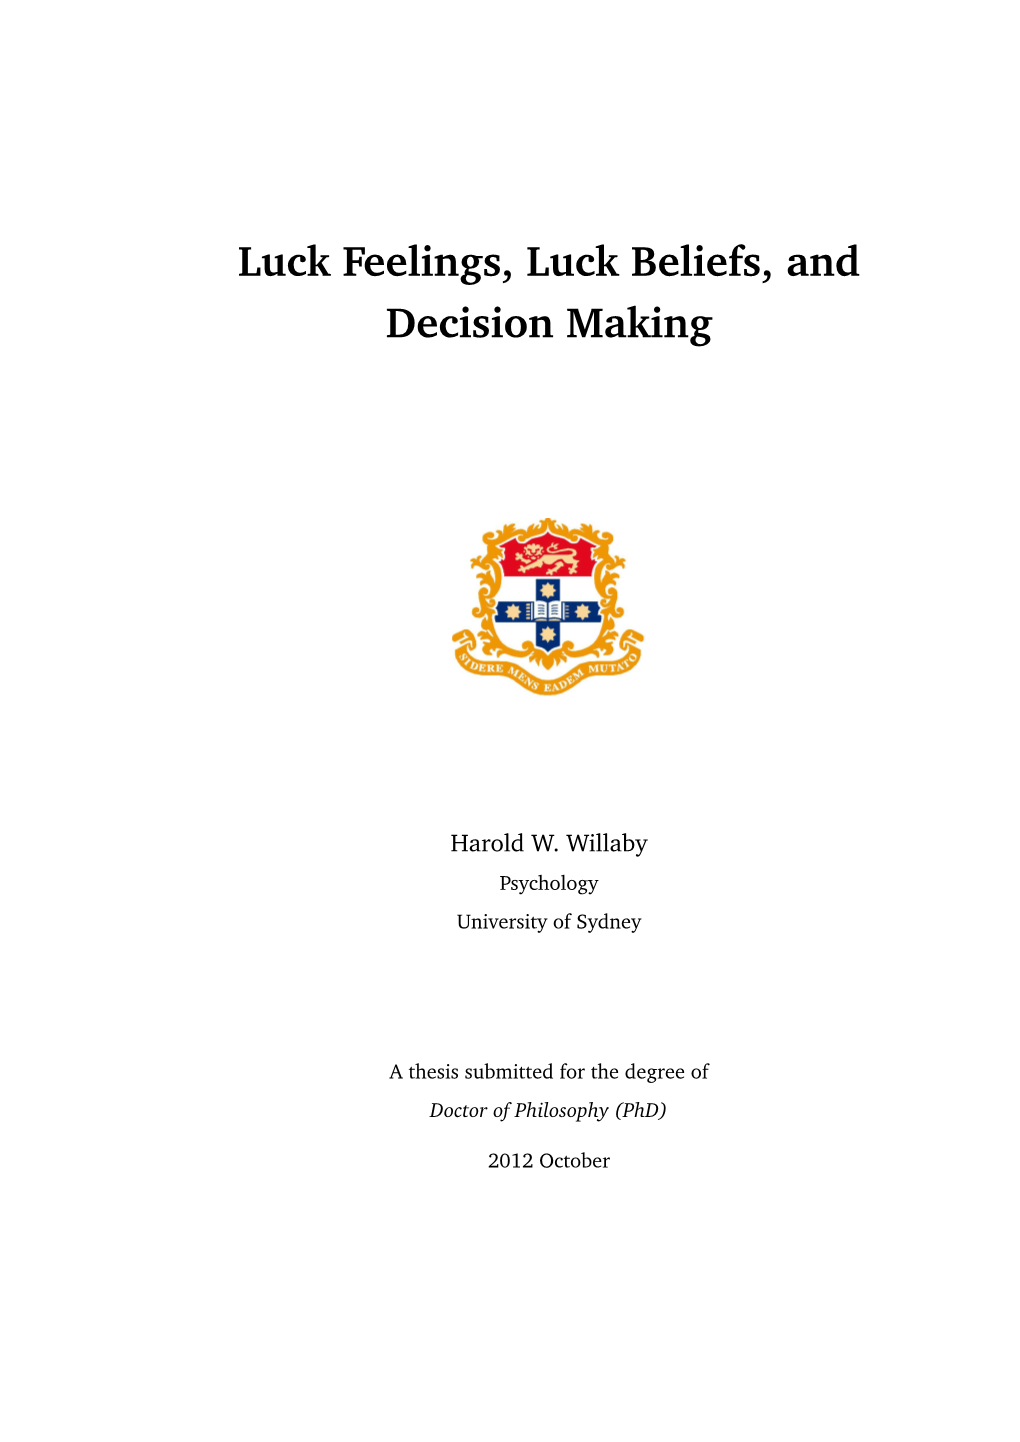 Luck Feelings, Luck Beliefs, and Decision Making